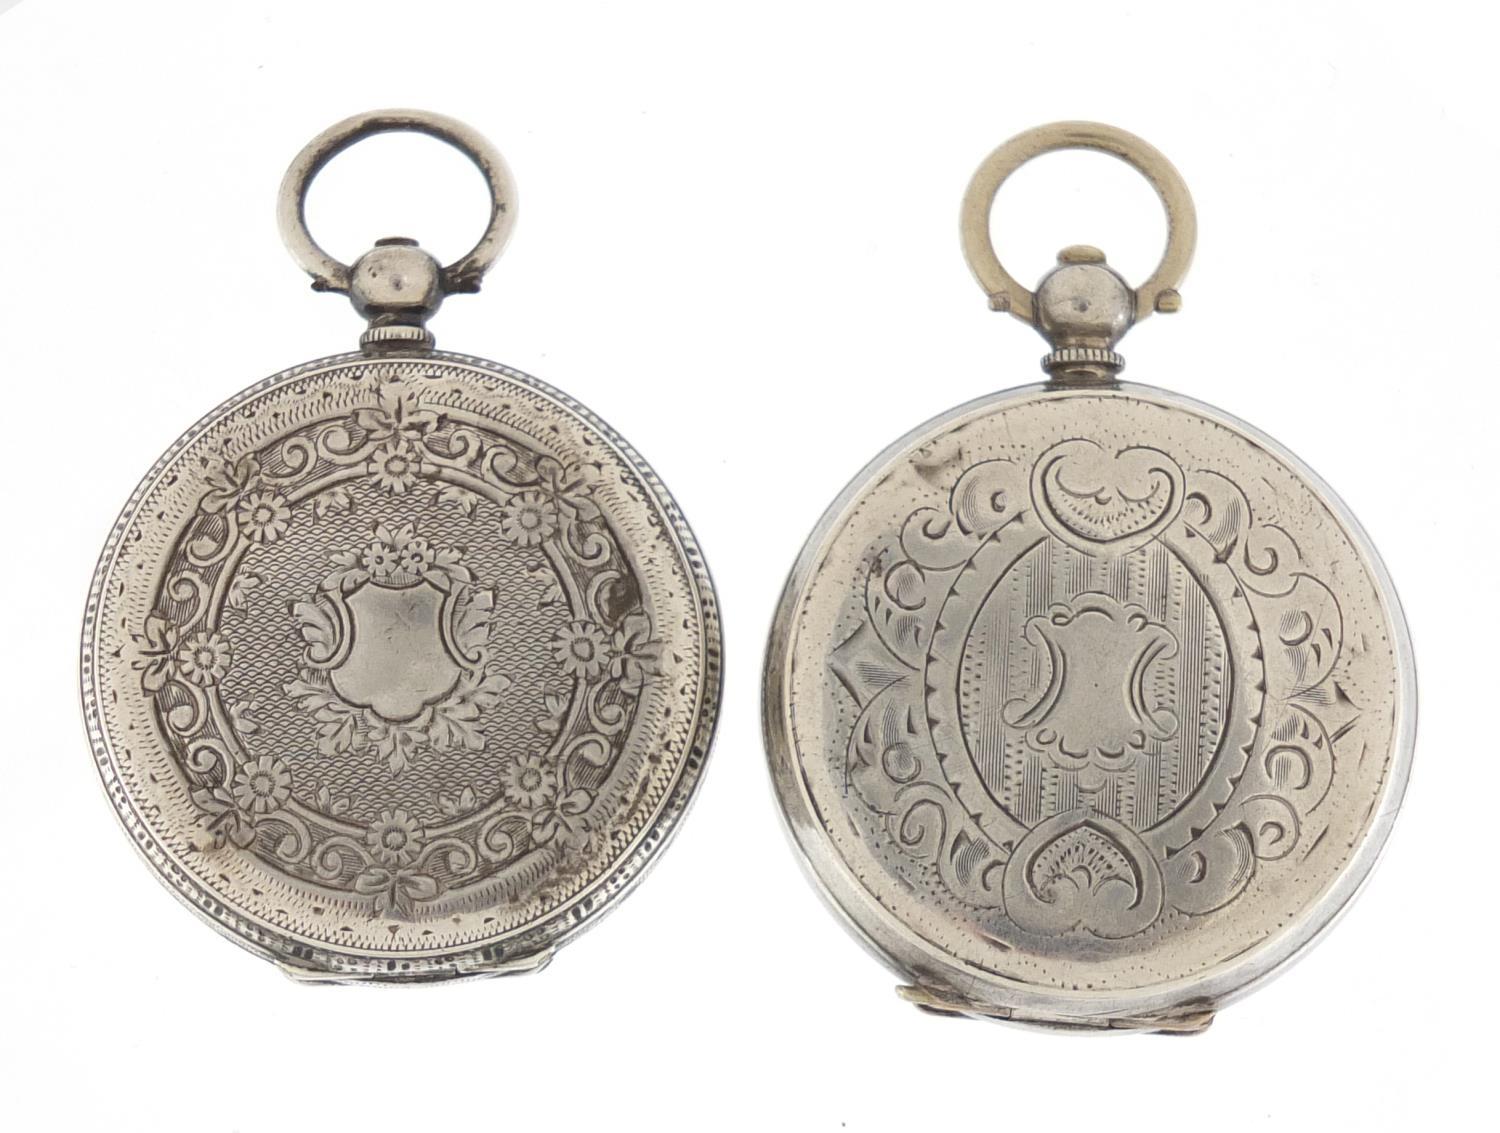 Two ladies silver open face pocket watches with ornate enamelled dials, each 35mm in diameter - Image 2 of 3